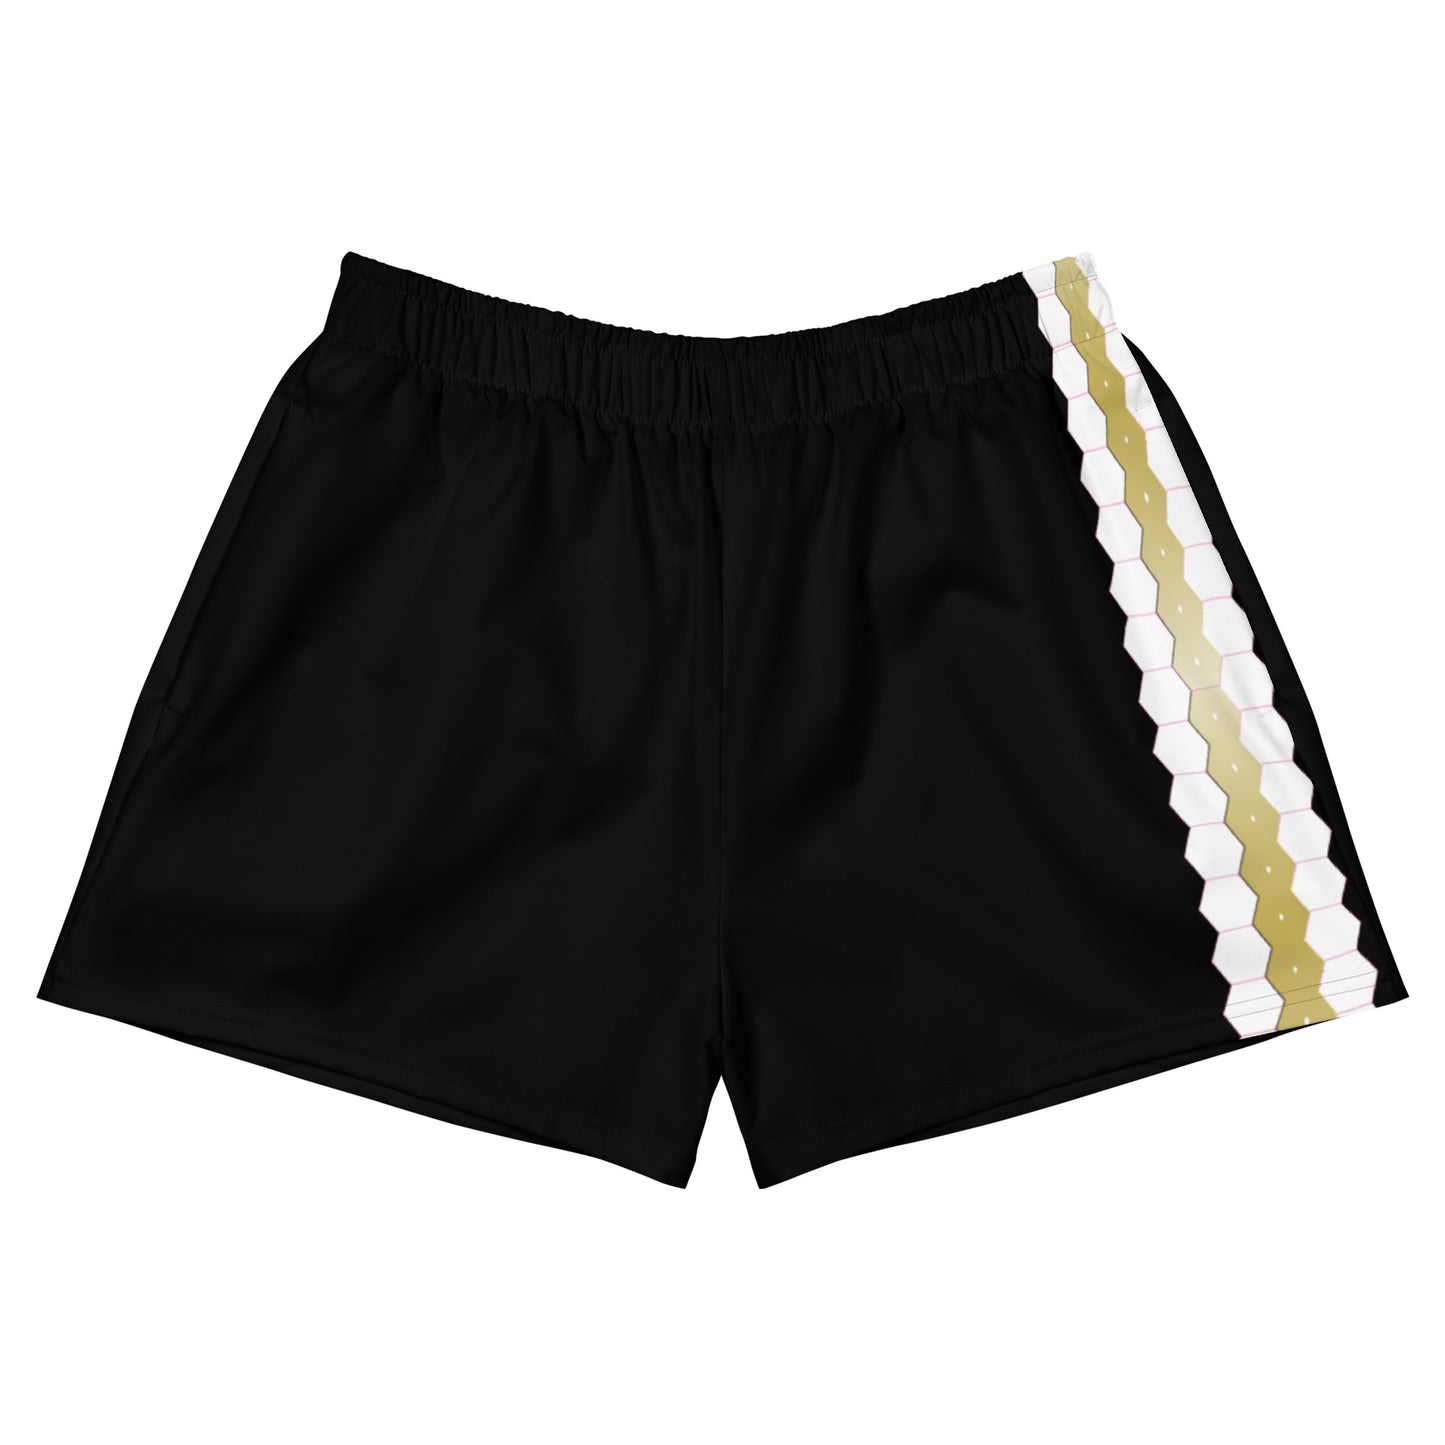 Snooty Fox Art Women’s Athletic Shorts - Gold / White Accent